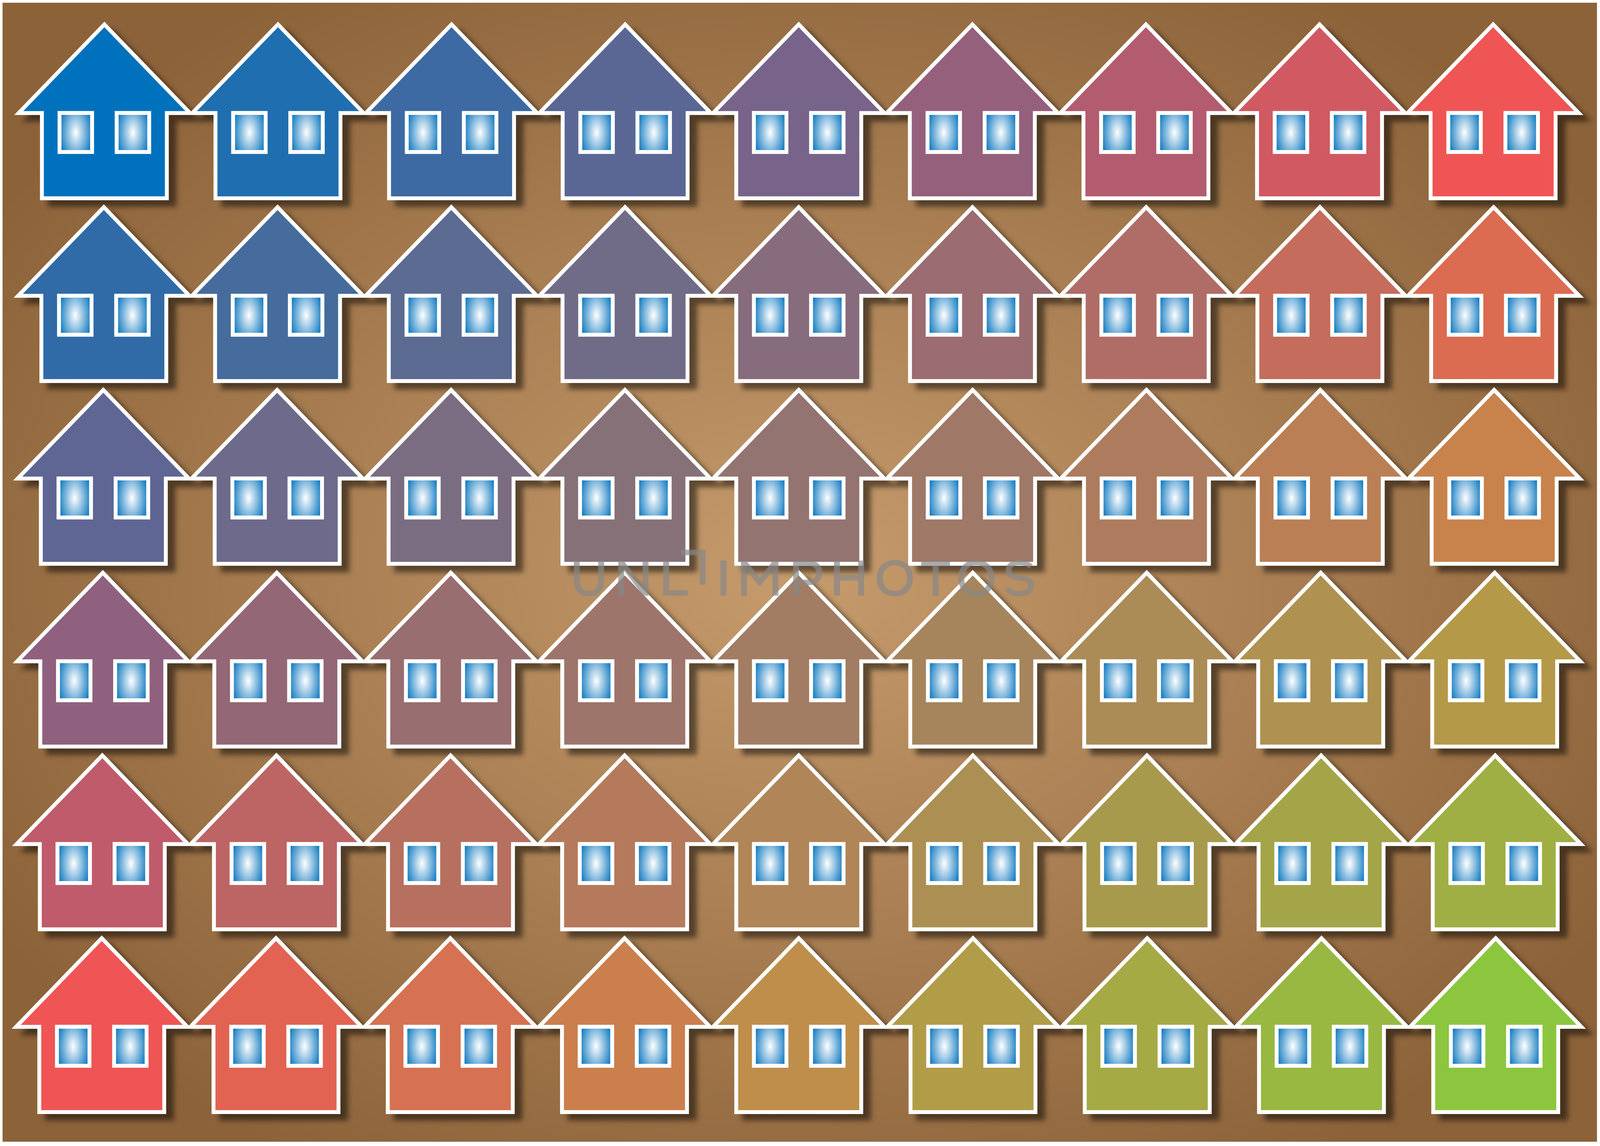 texture formed by regularly spaced houses of different colors group home